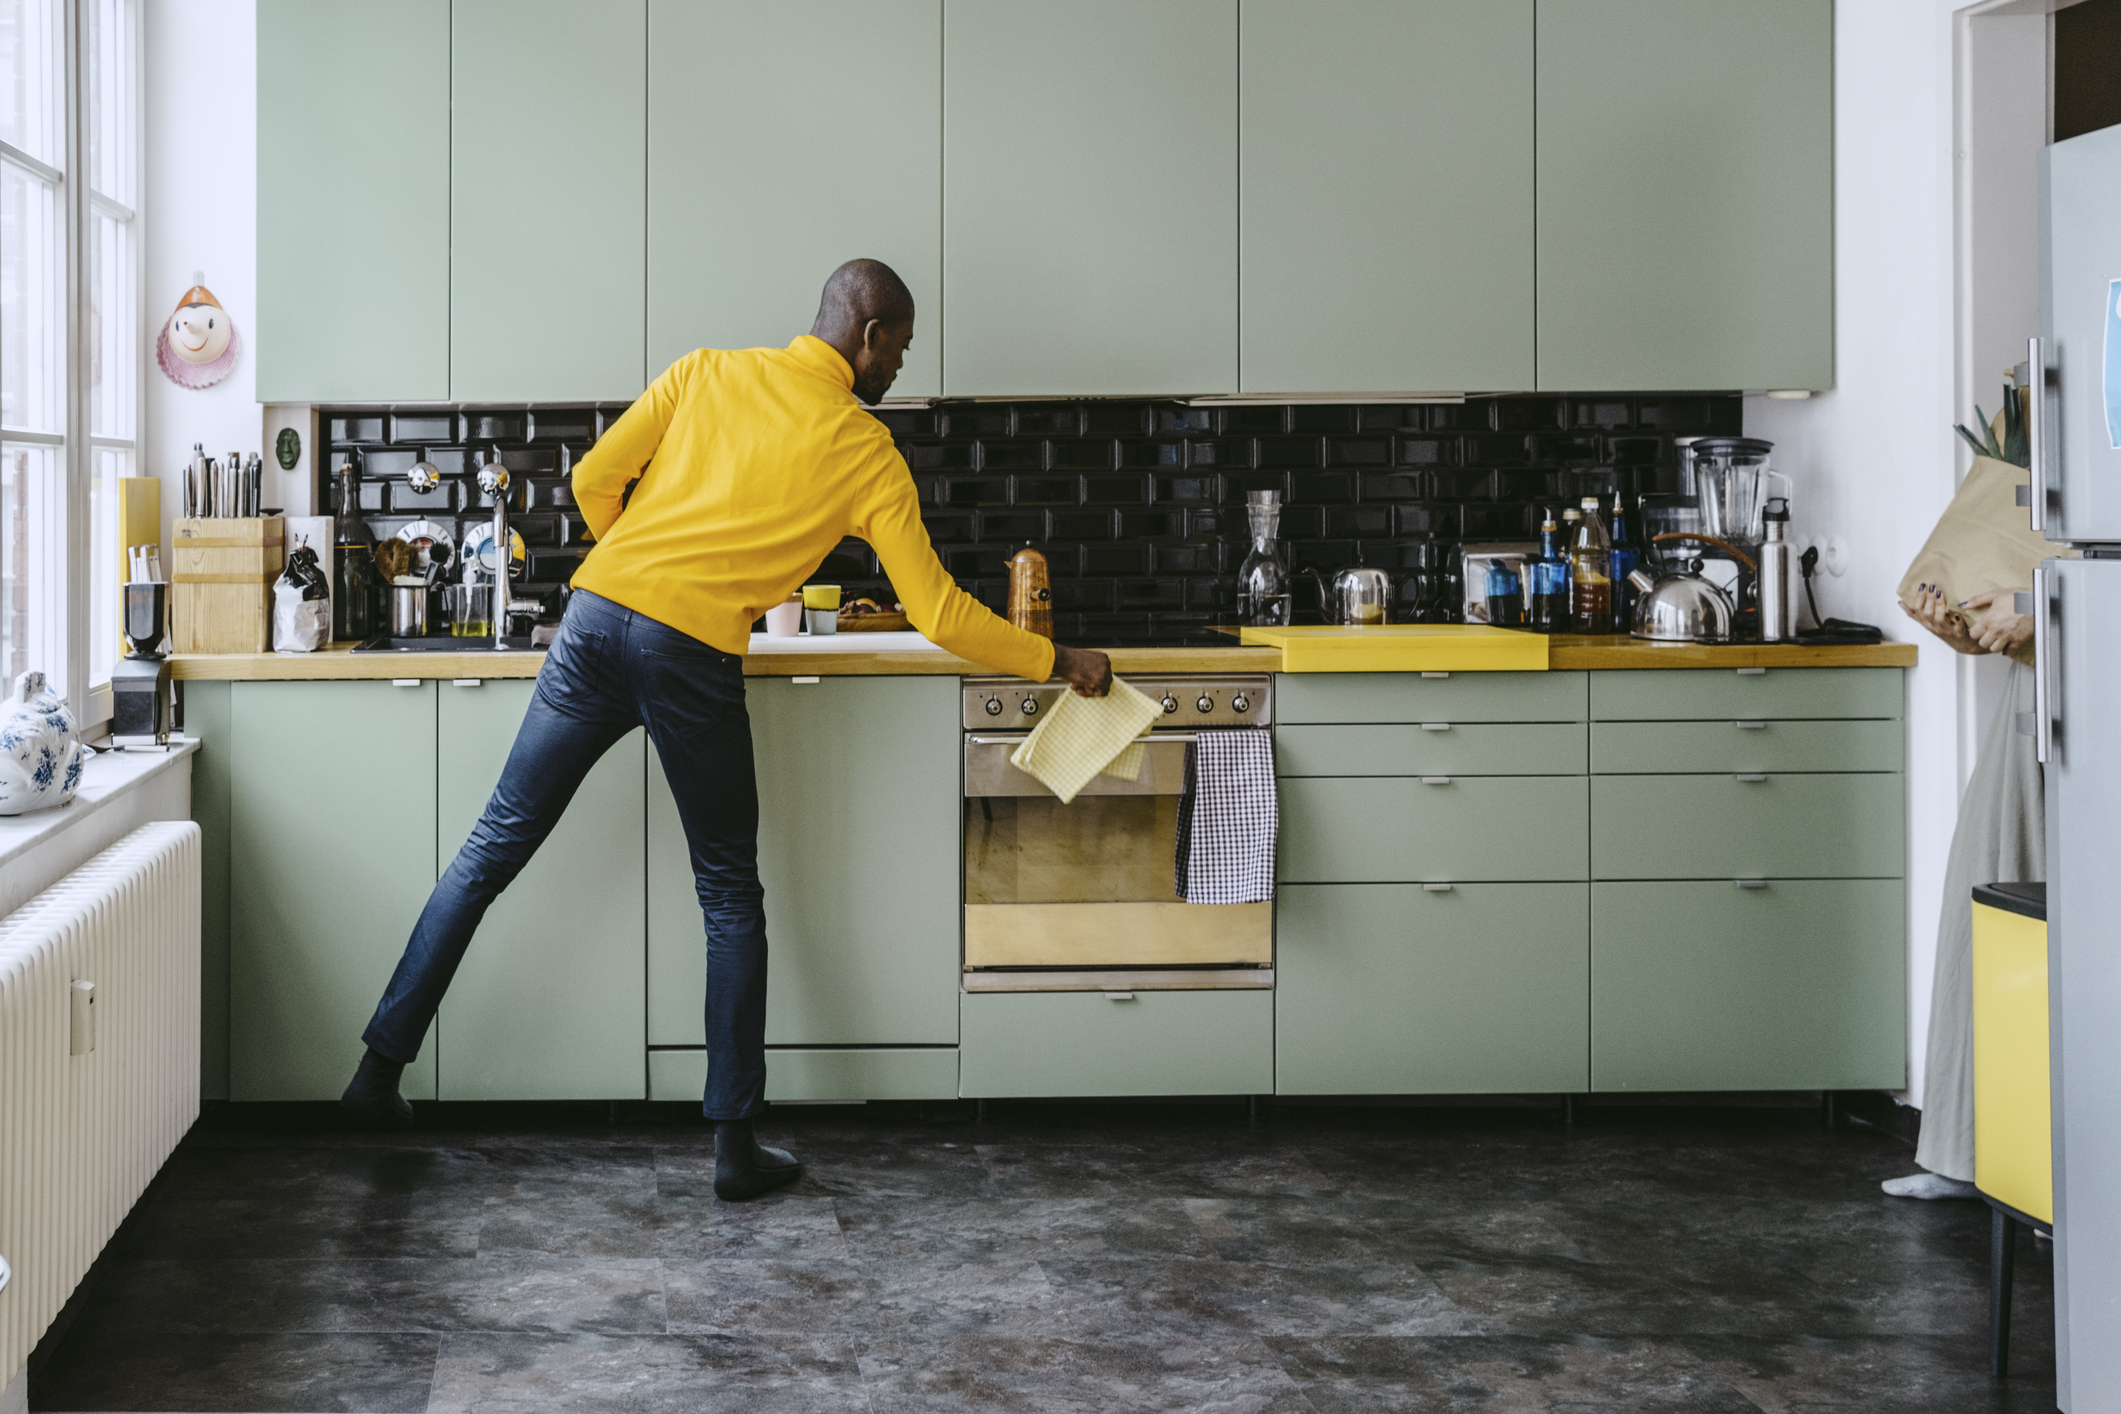 A person in a yellow jumper and dark jeans tidying a modern kitchen with light green cabinets and black backsplash. They hold a yellow cloth near the oven